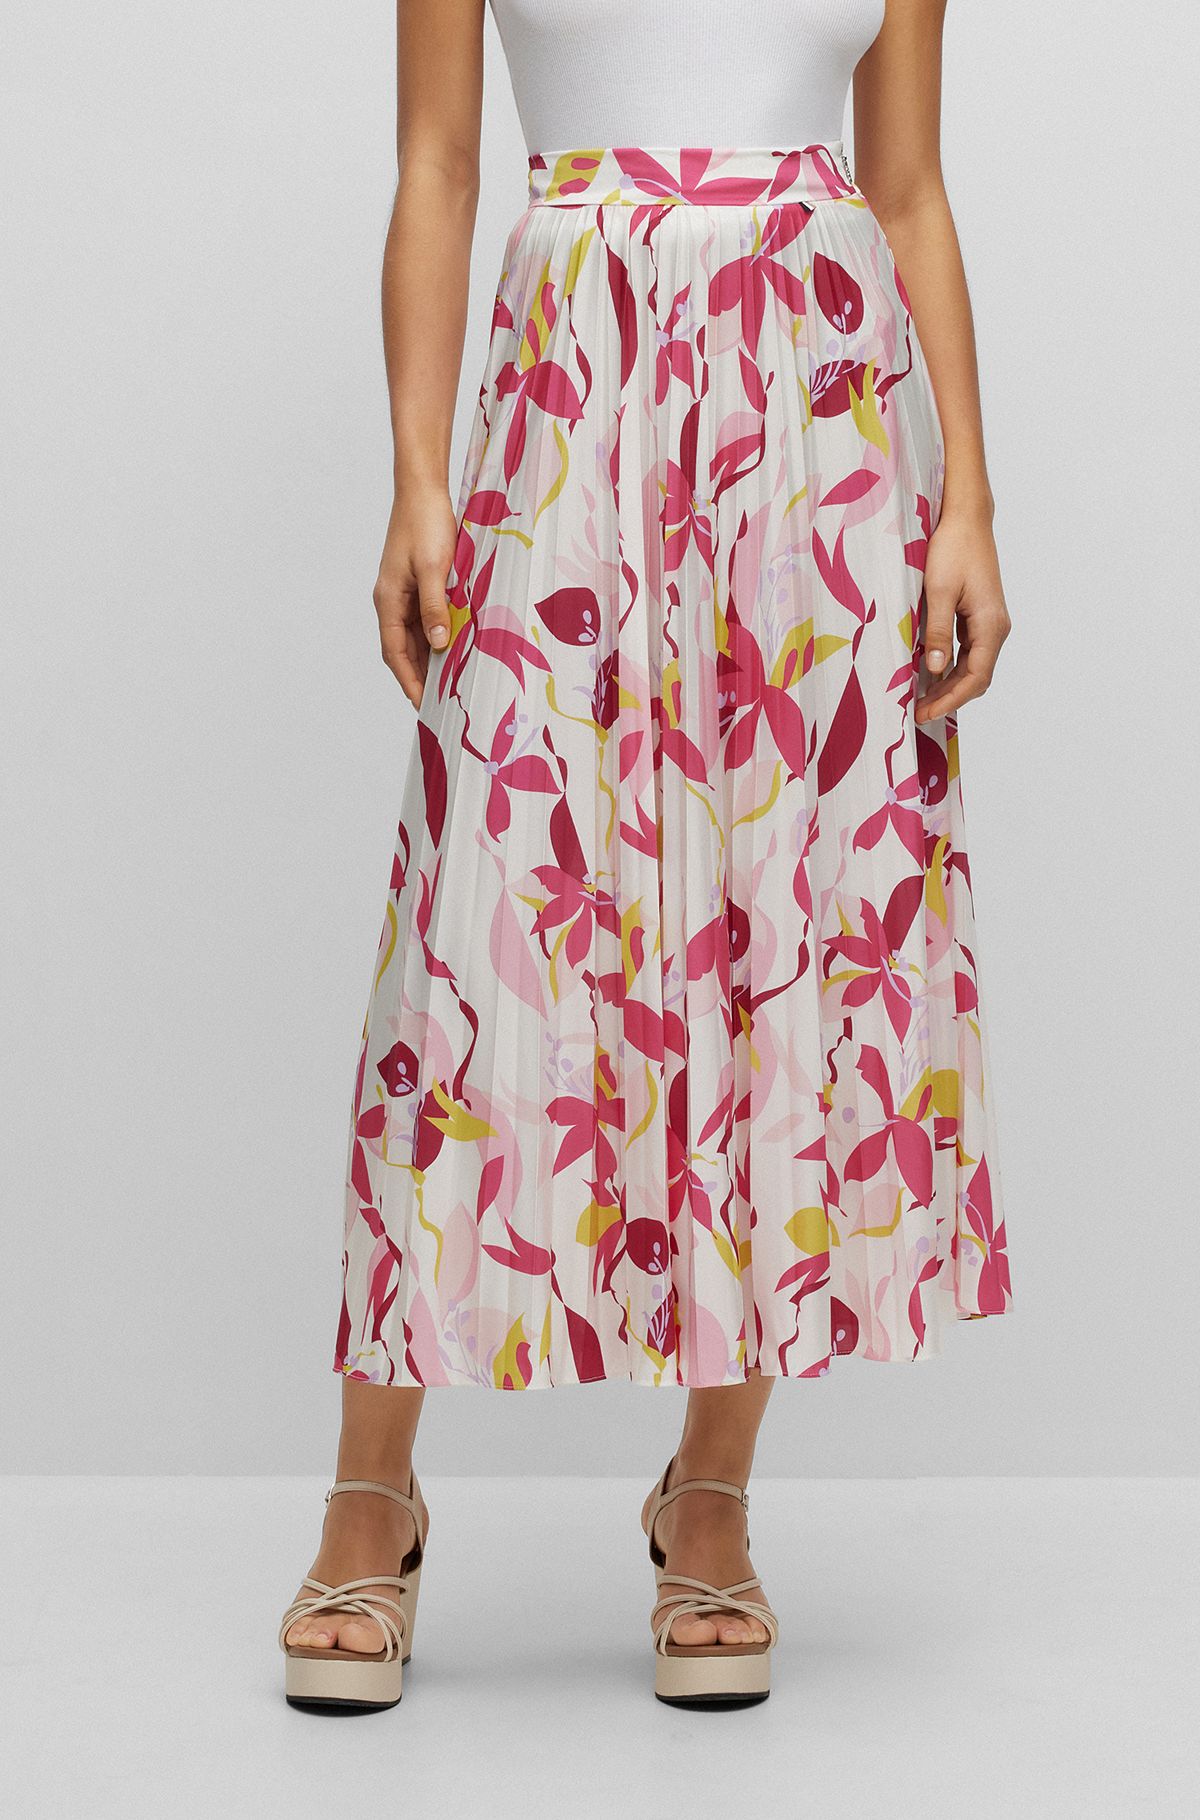 Plissé skirt with all-over seasonal print, Patterned